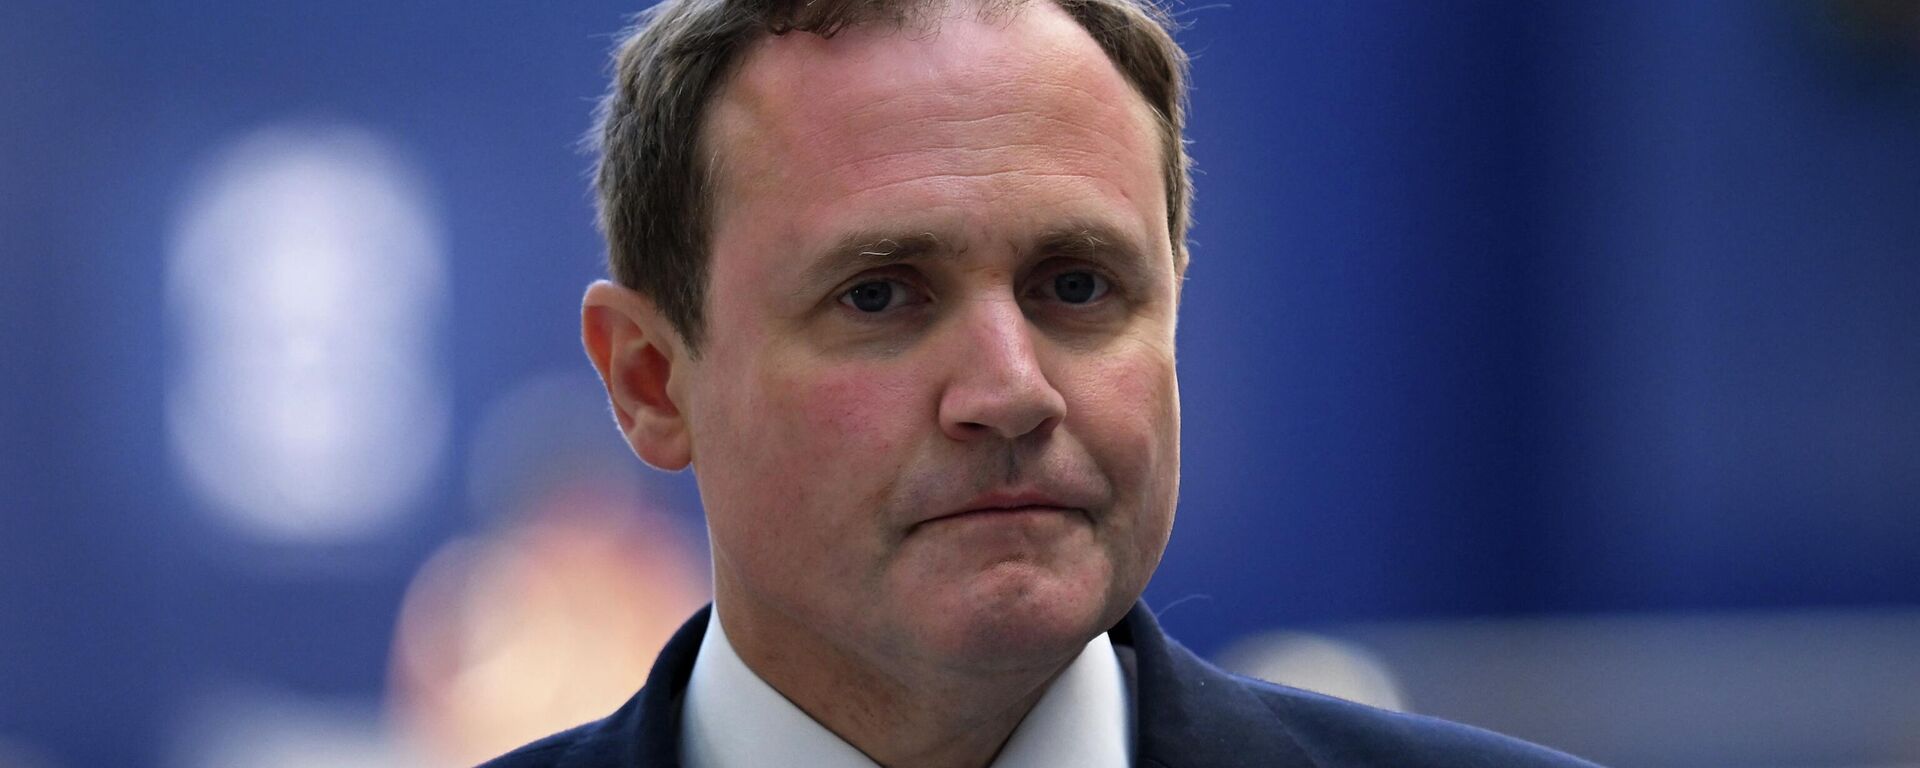 Conservative politician Tom Tugendhat arrives at the BBC in central London on July 10, 2022, to appear on the BBC's 'Sunday Morning' political television show with journalist Sophie Raworth. - Sputnik International, 1920, 10.07.2022